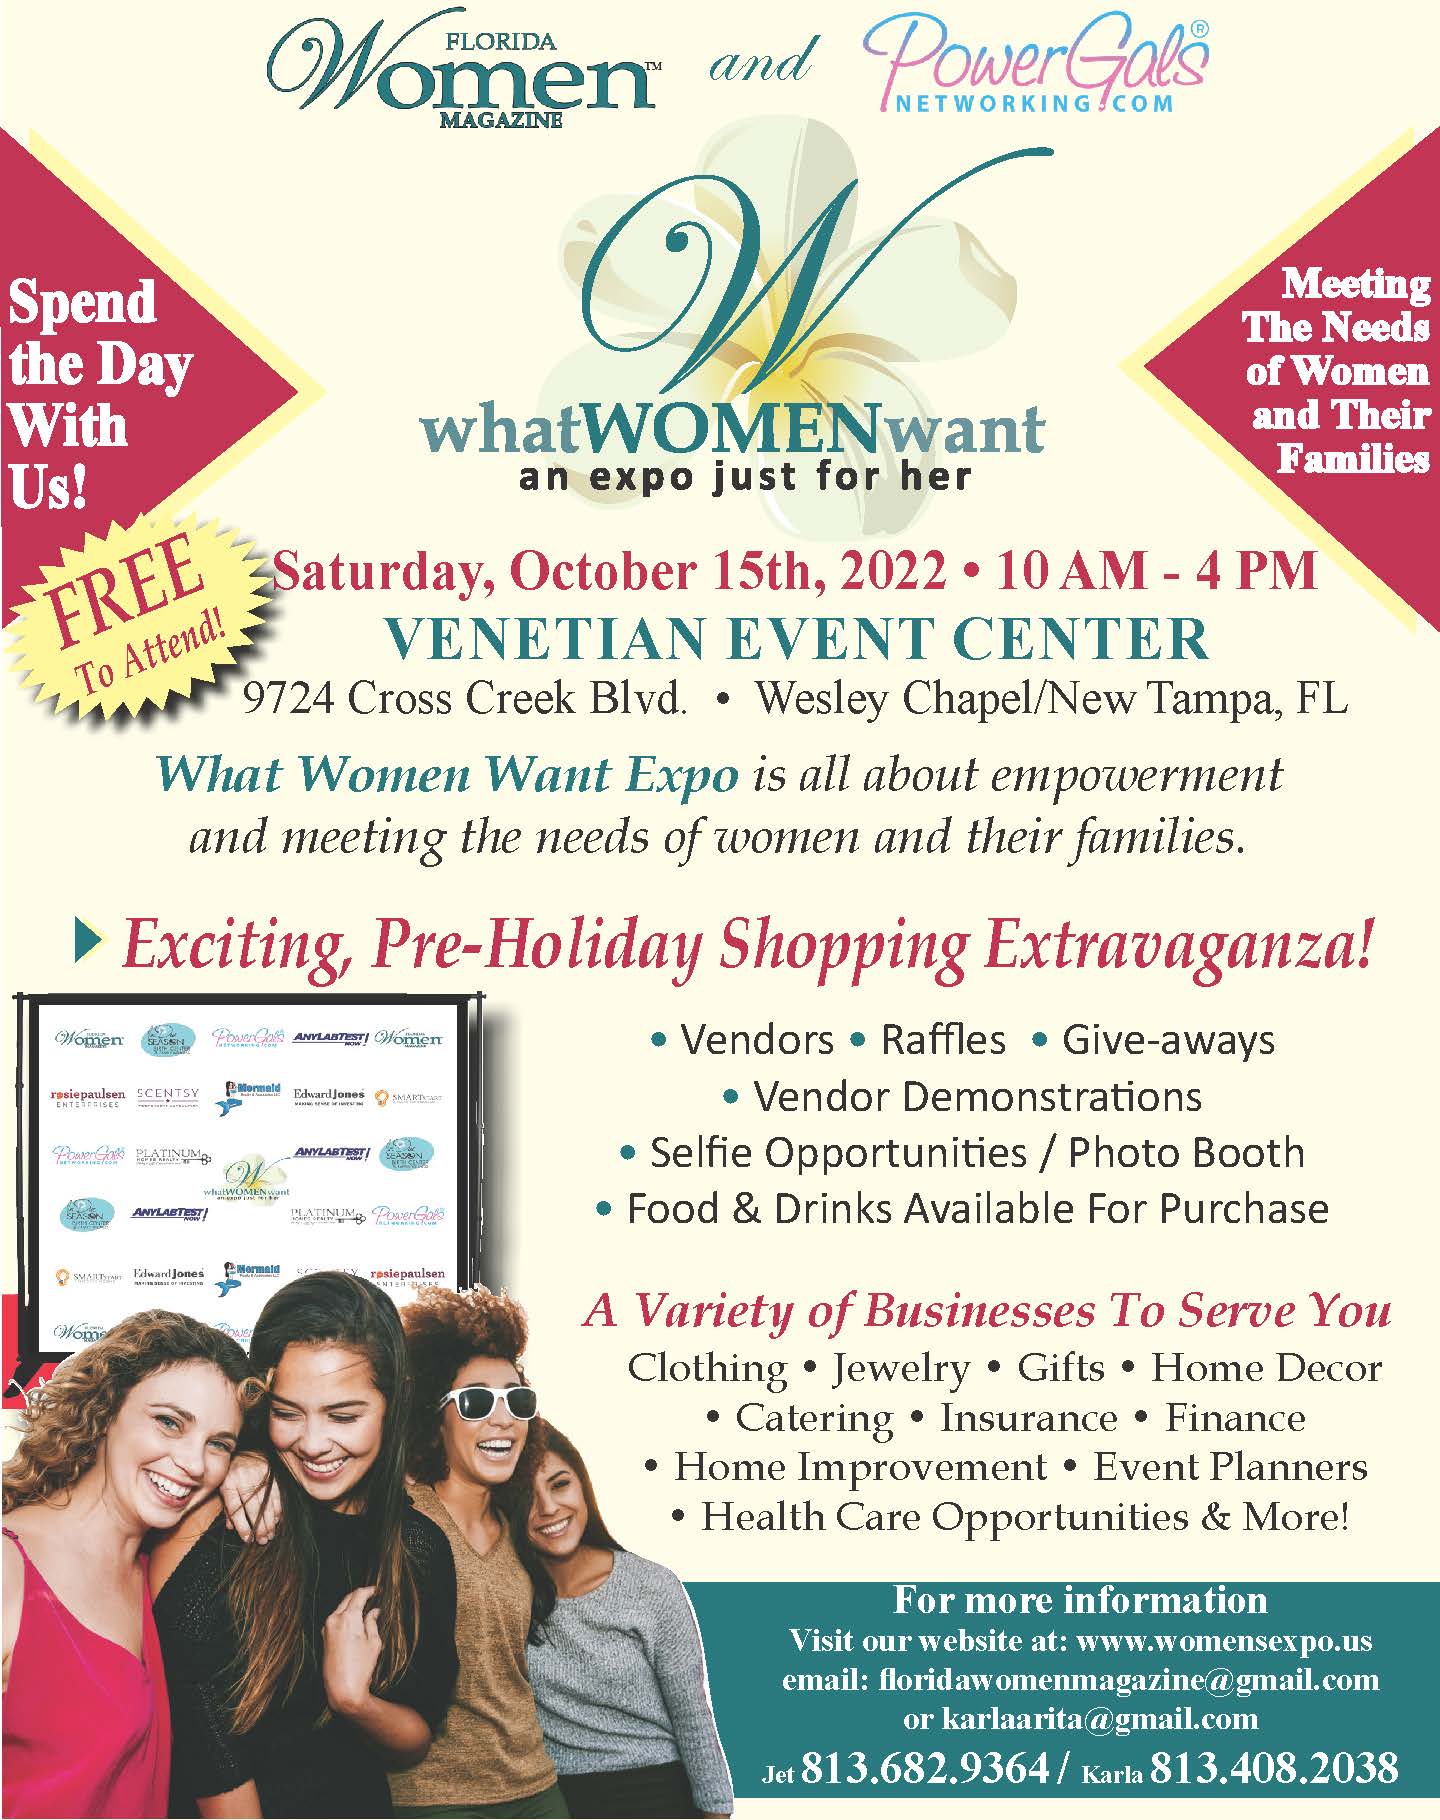 What Women Want Expo Flyer Oct2021 031421